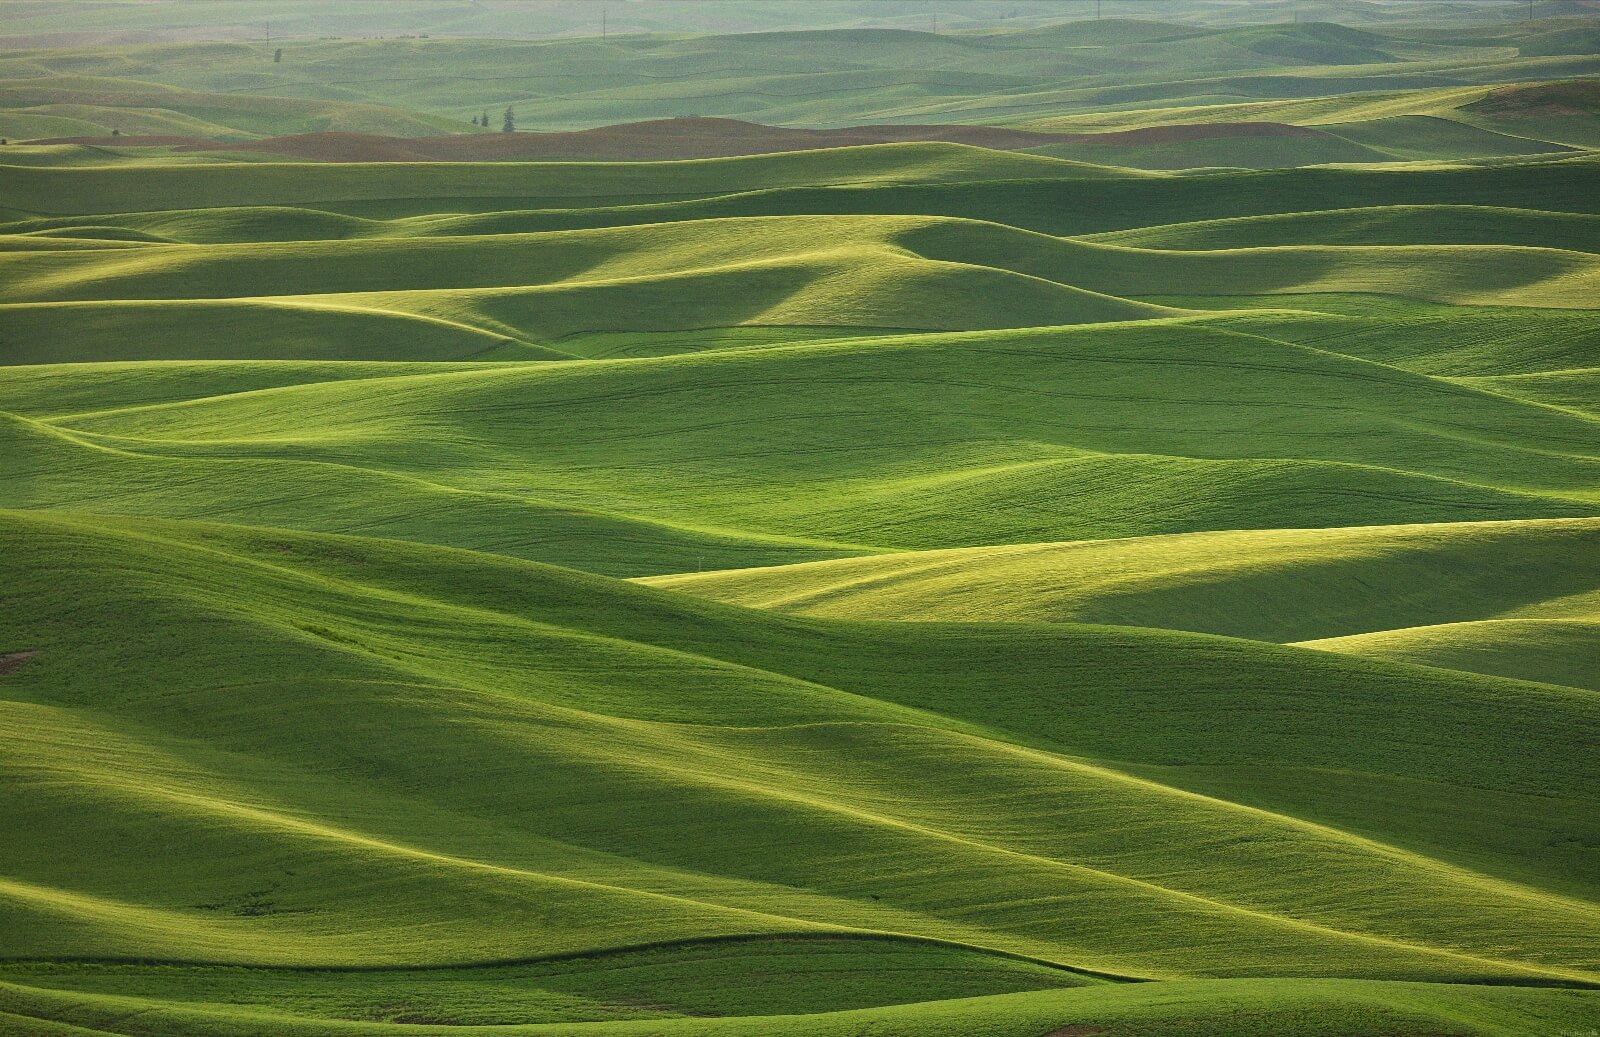 Image of West Steptoe Butte Viewpoint by Greg Stringham